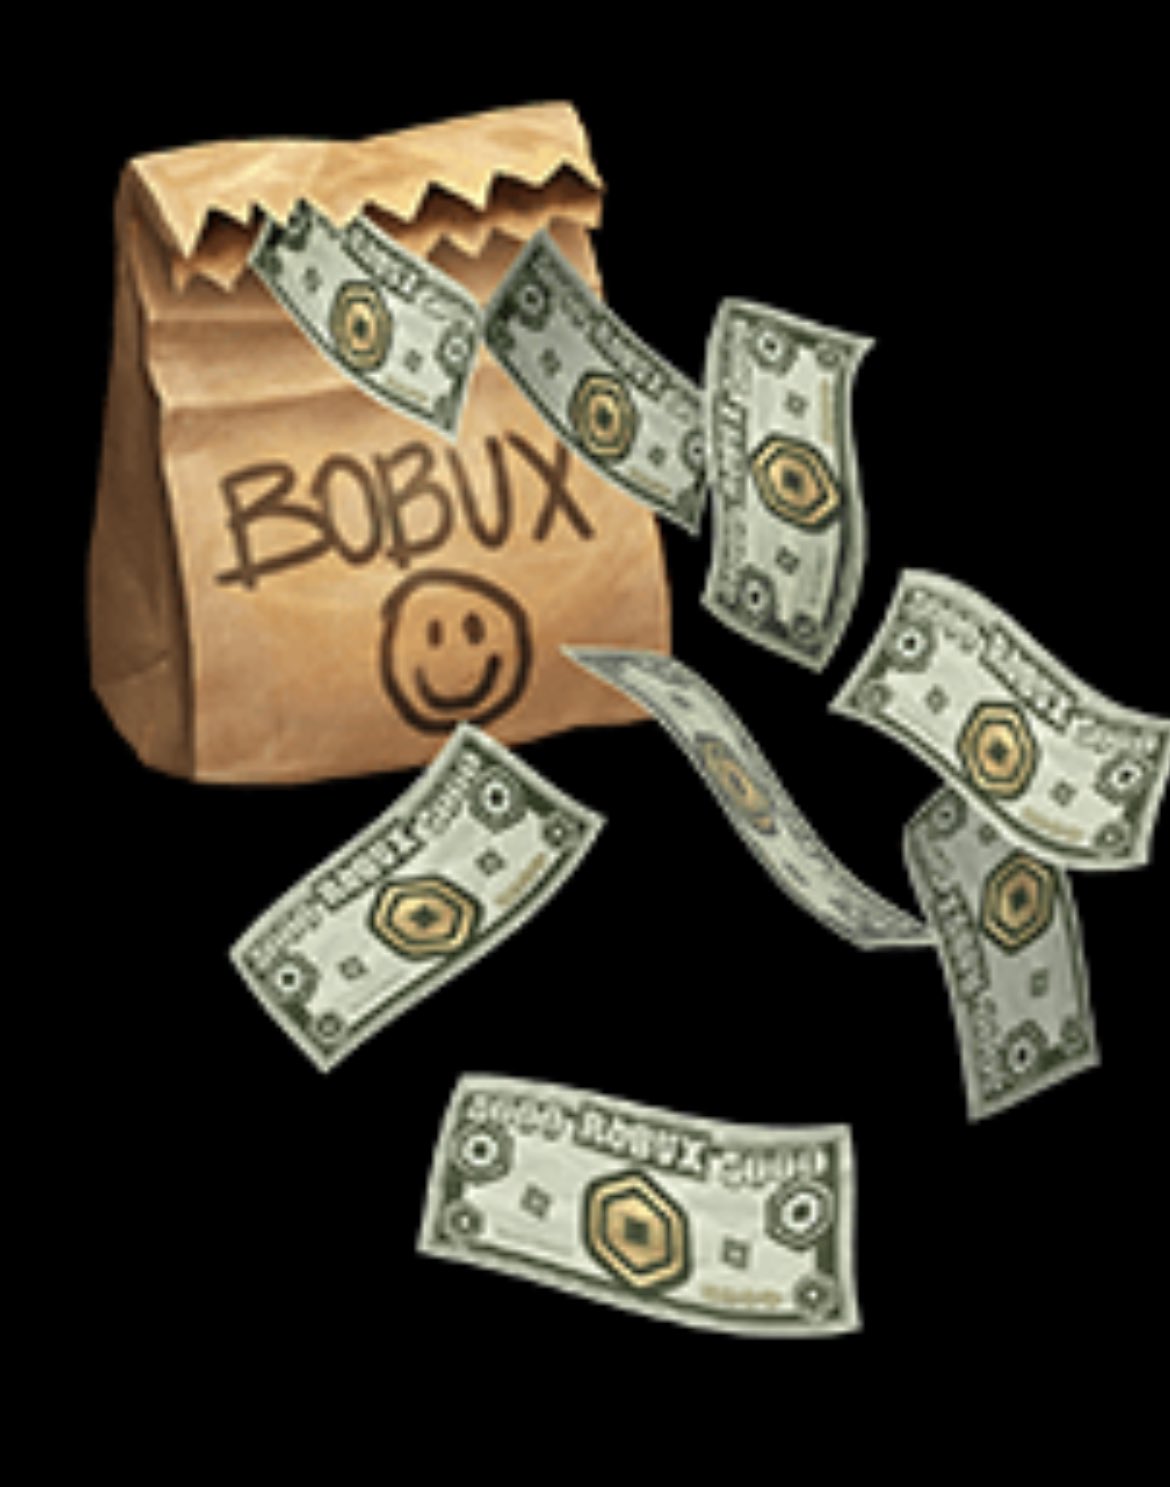 HOW TO GET BOBUX BAG IN ROBLOX 